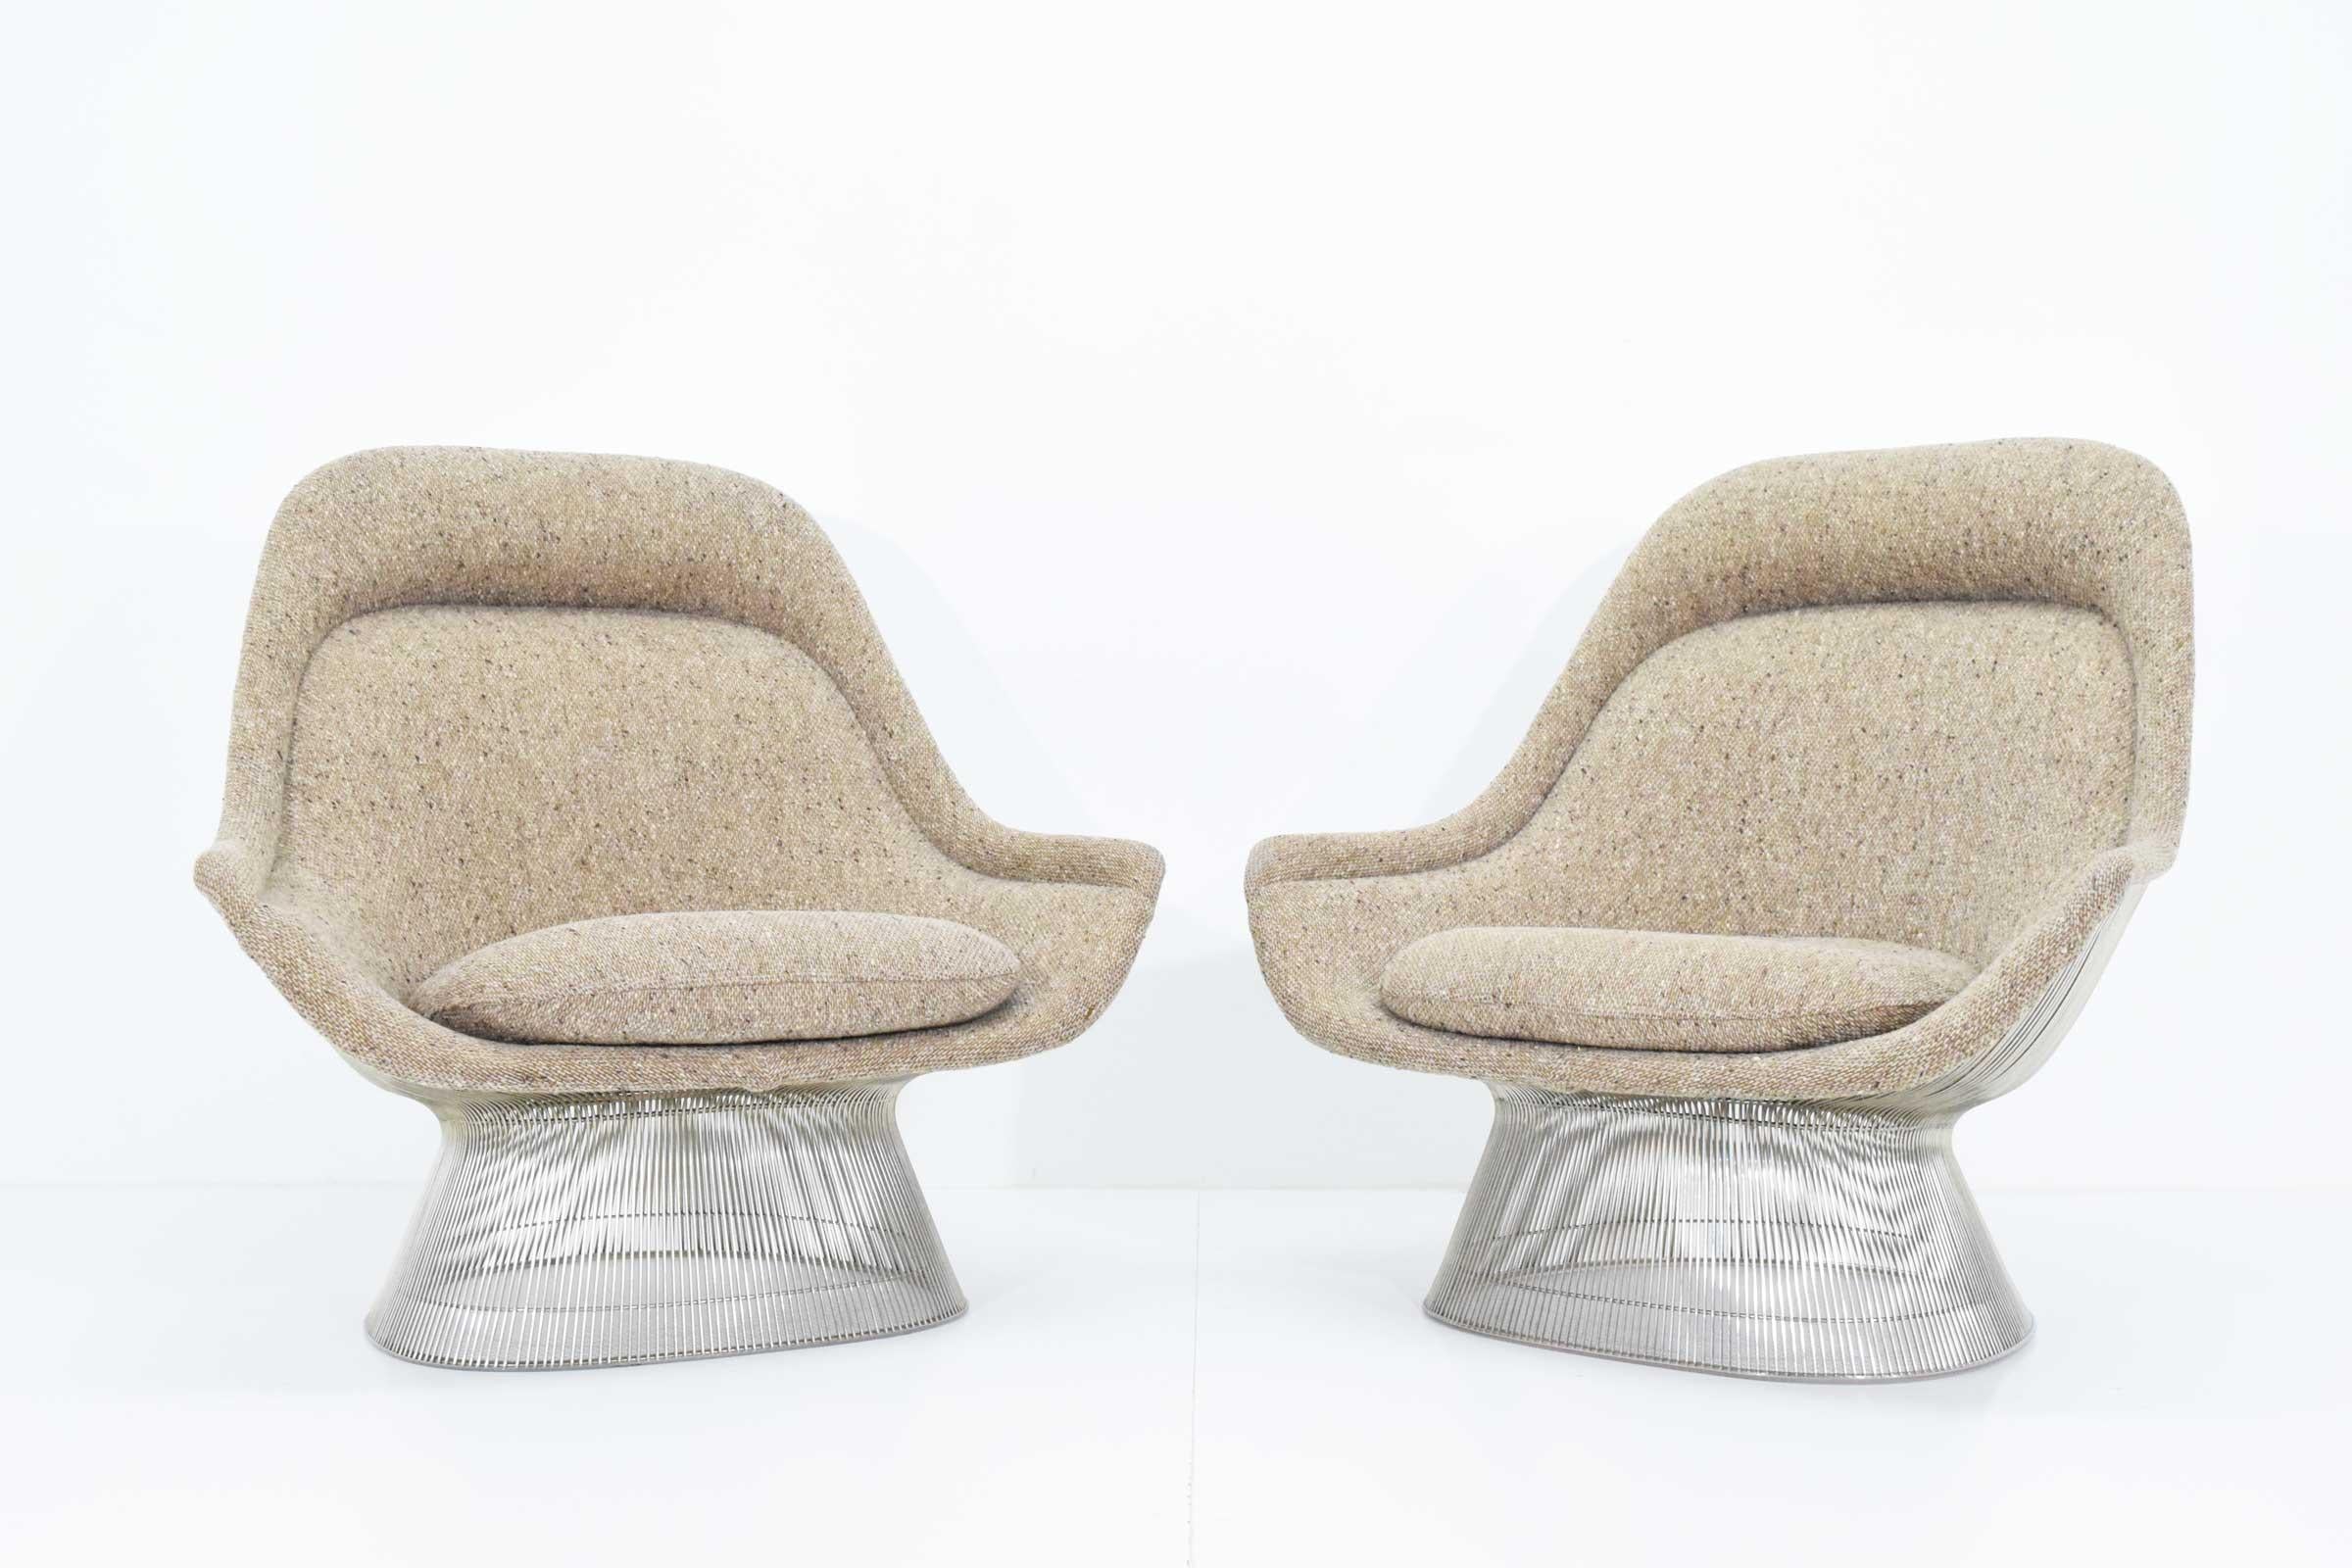 Beautiful pair of large Warren Platner lounge chairs in a beige wool tween that appears to be the original fabric. Chairs are nickel-plated and date 1980s. They are in beautiful condition.